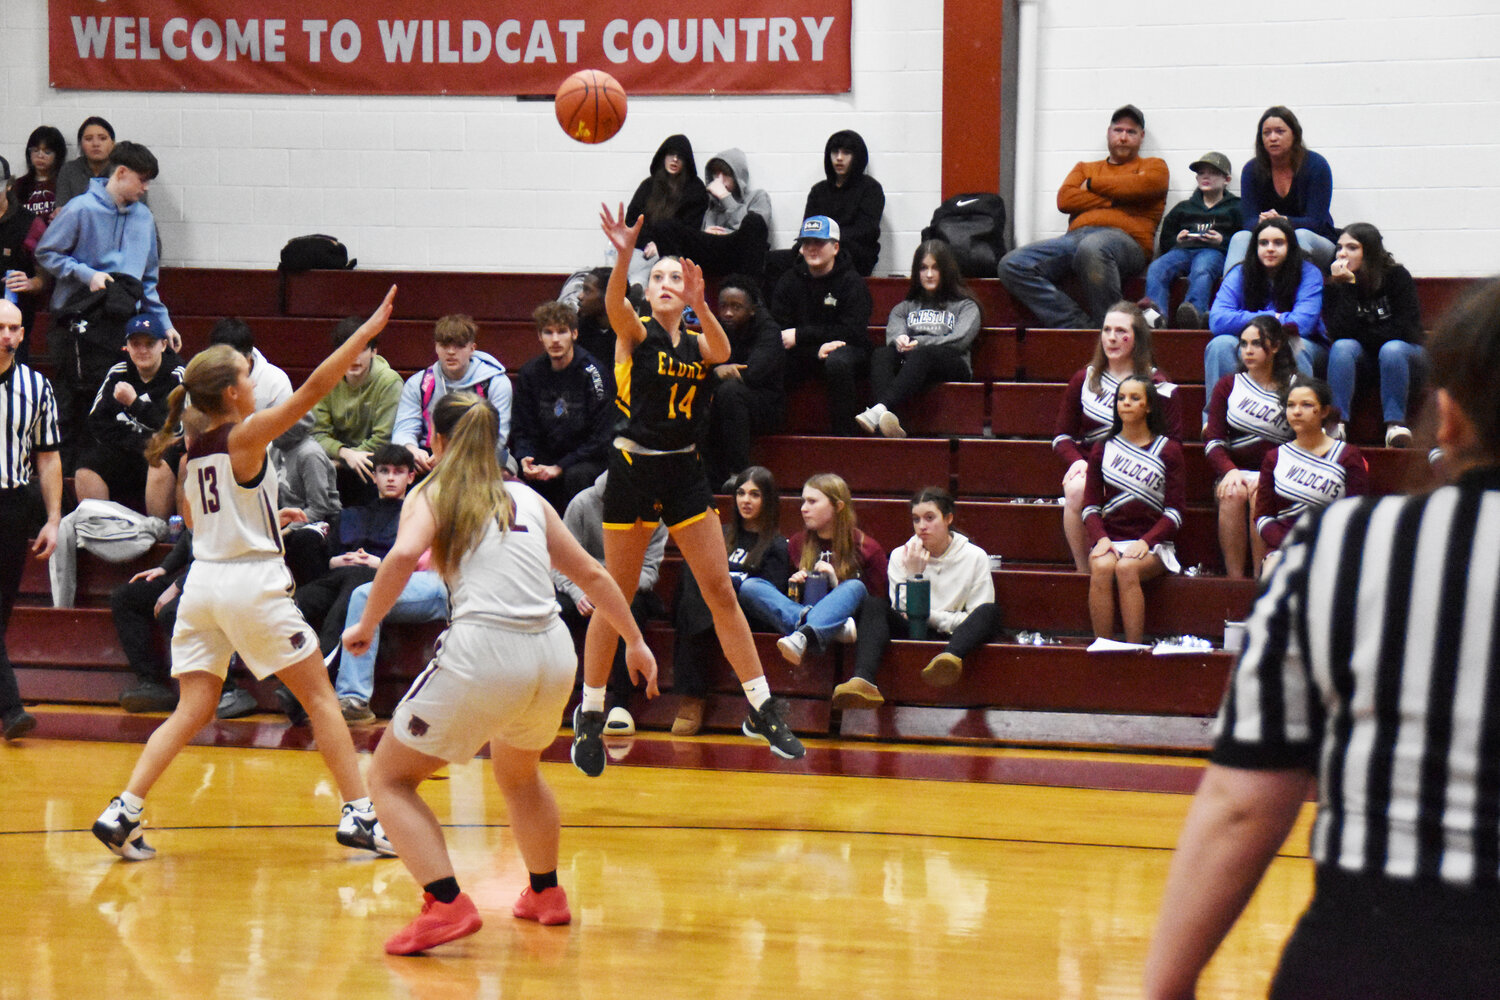 Victoria Ryman moved up to Varsity and scored 10 points in the division game against Livingston Manor.